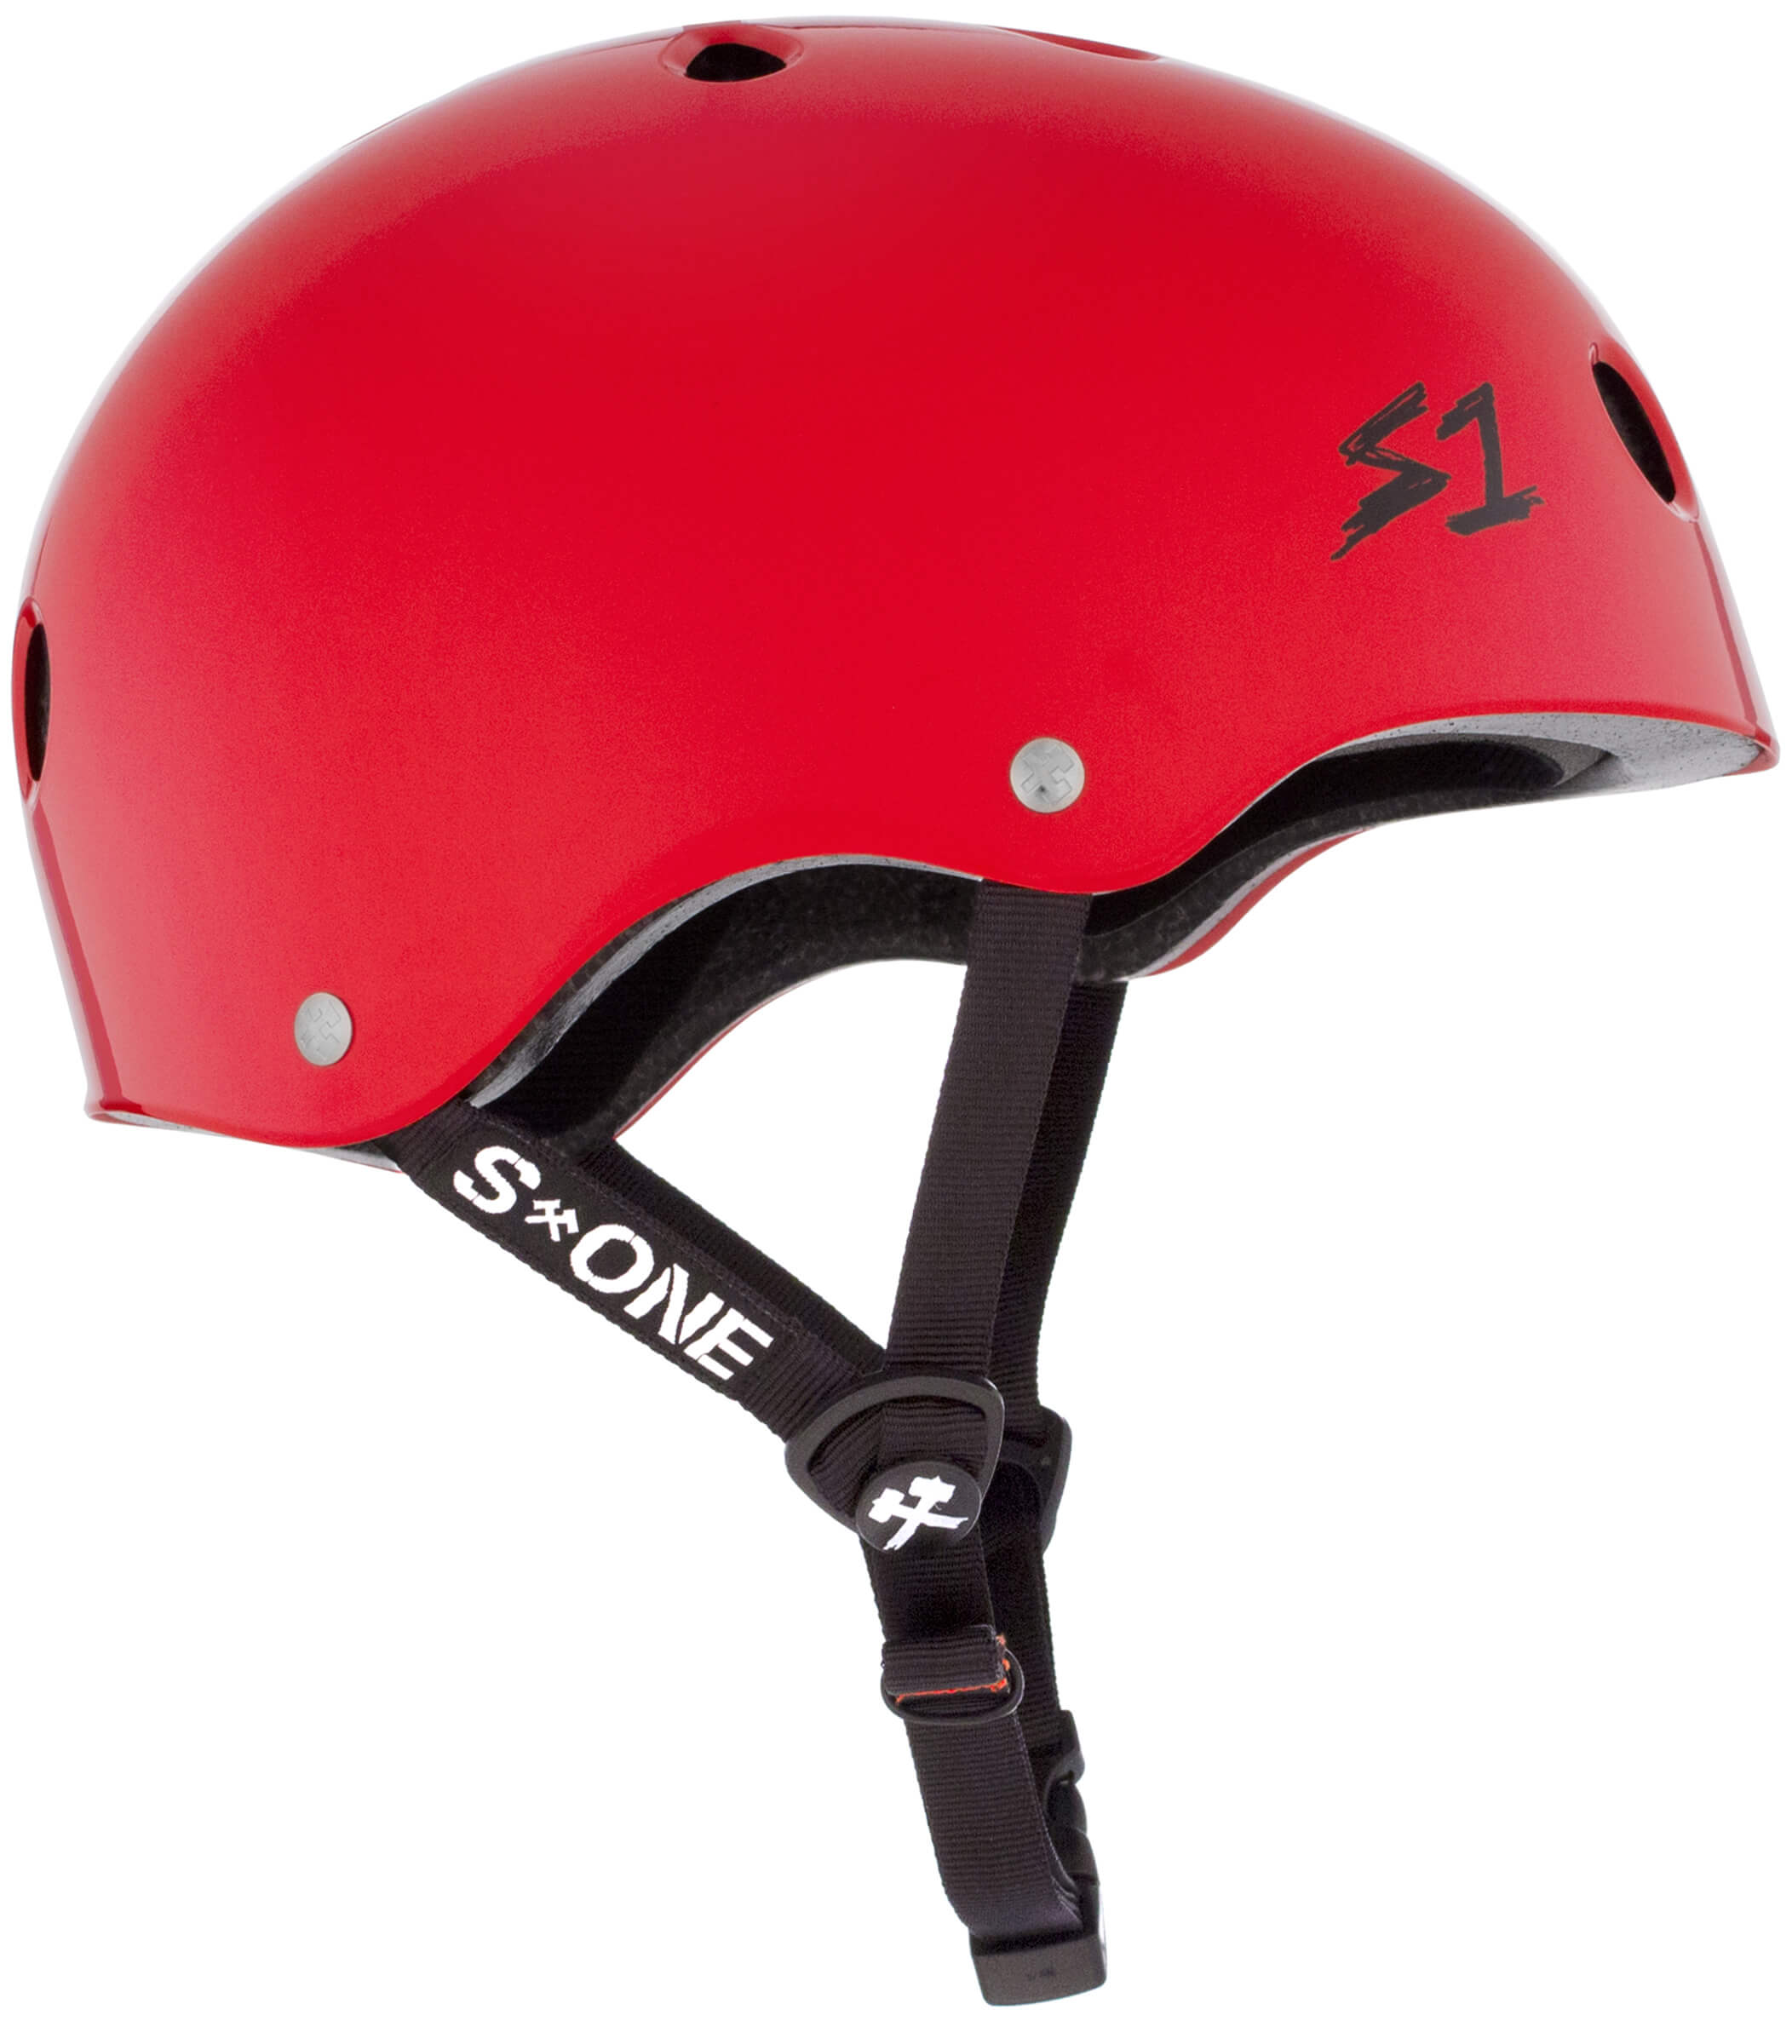 Cpsc Certified Helmet on Sale, 53% OFF | empow-her.com